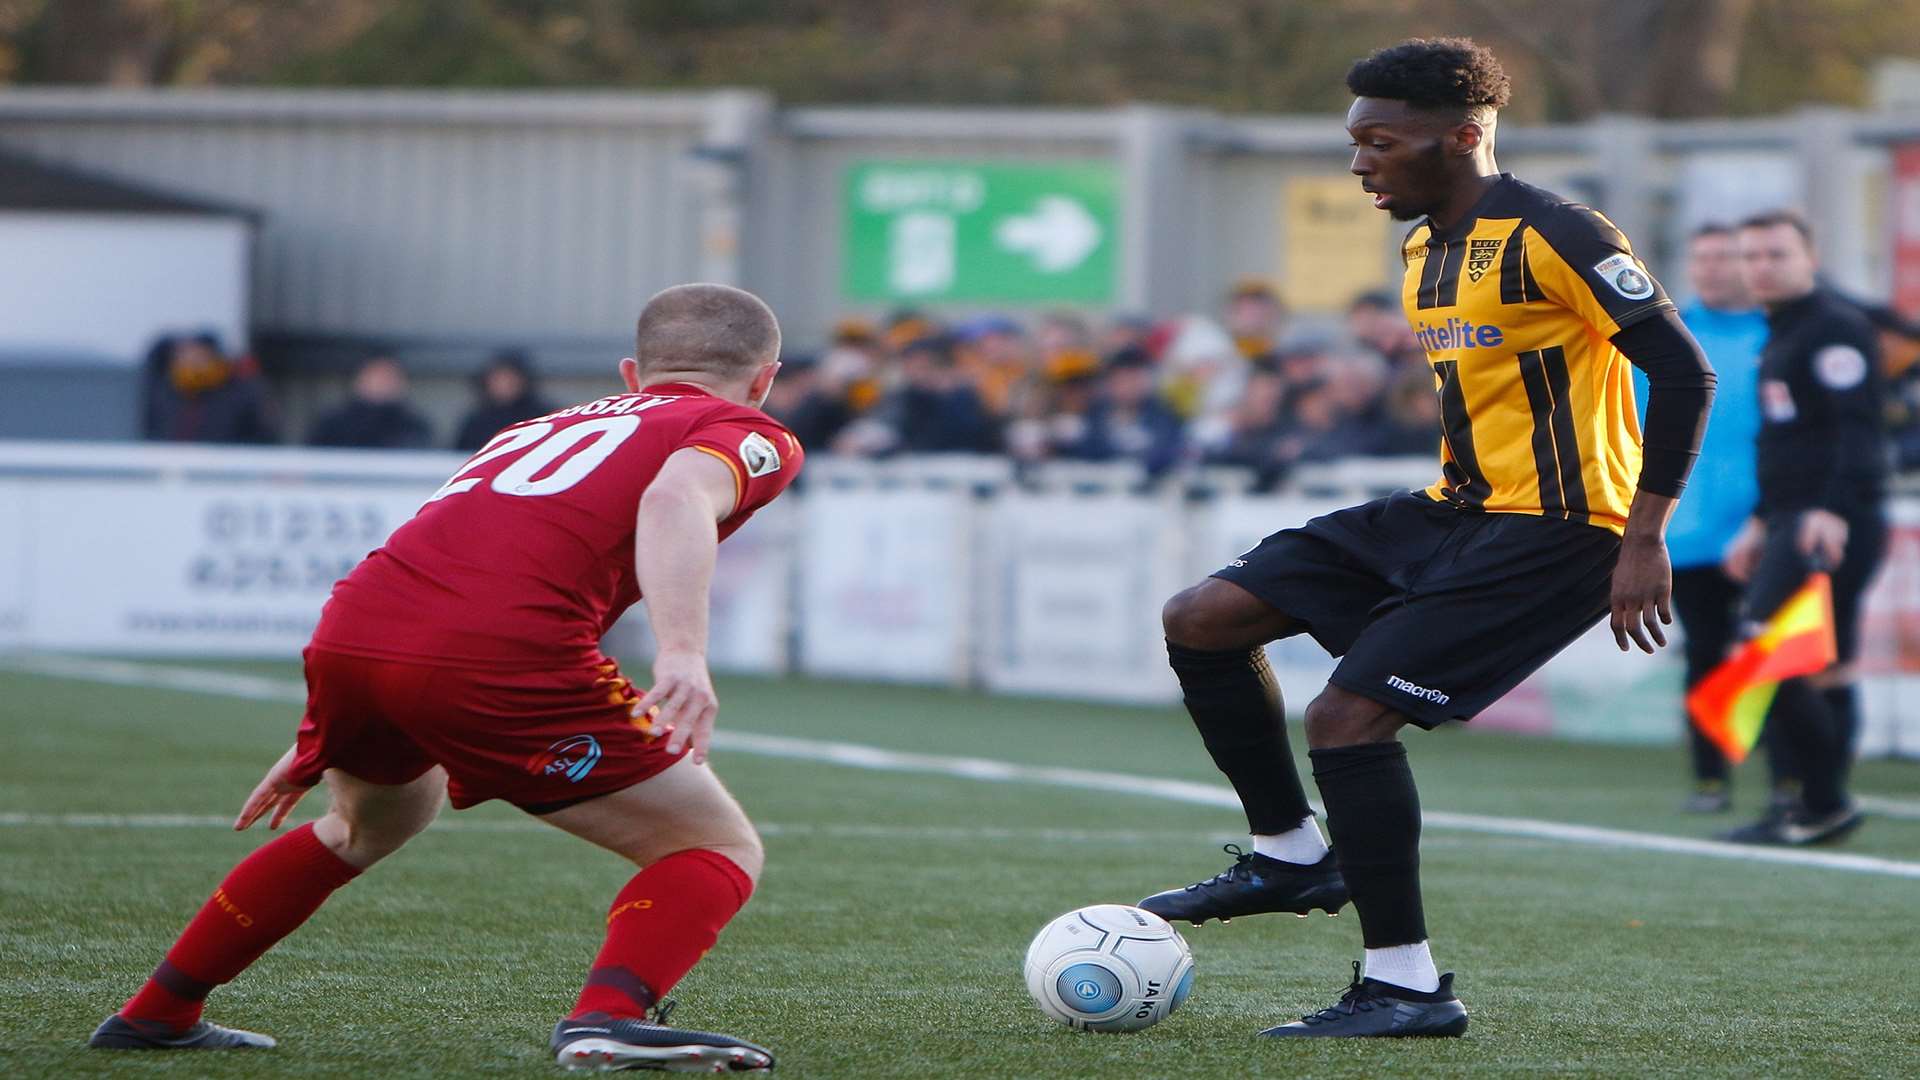 Blair Turgott gets a foot on the ball Picture: Andy Jones